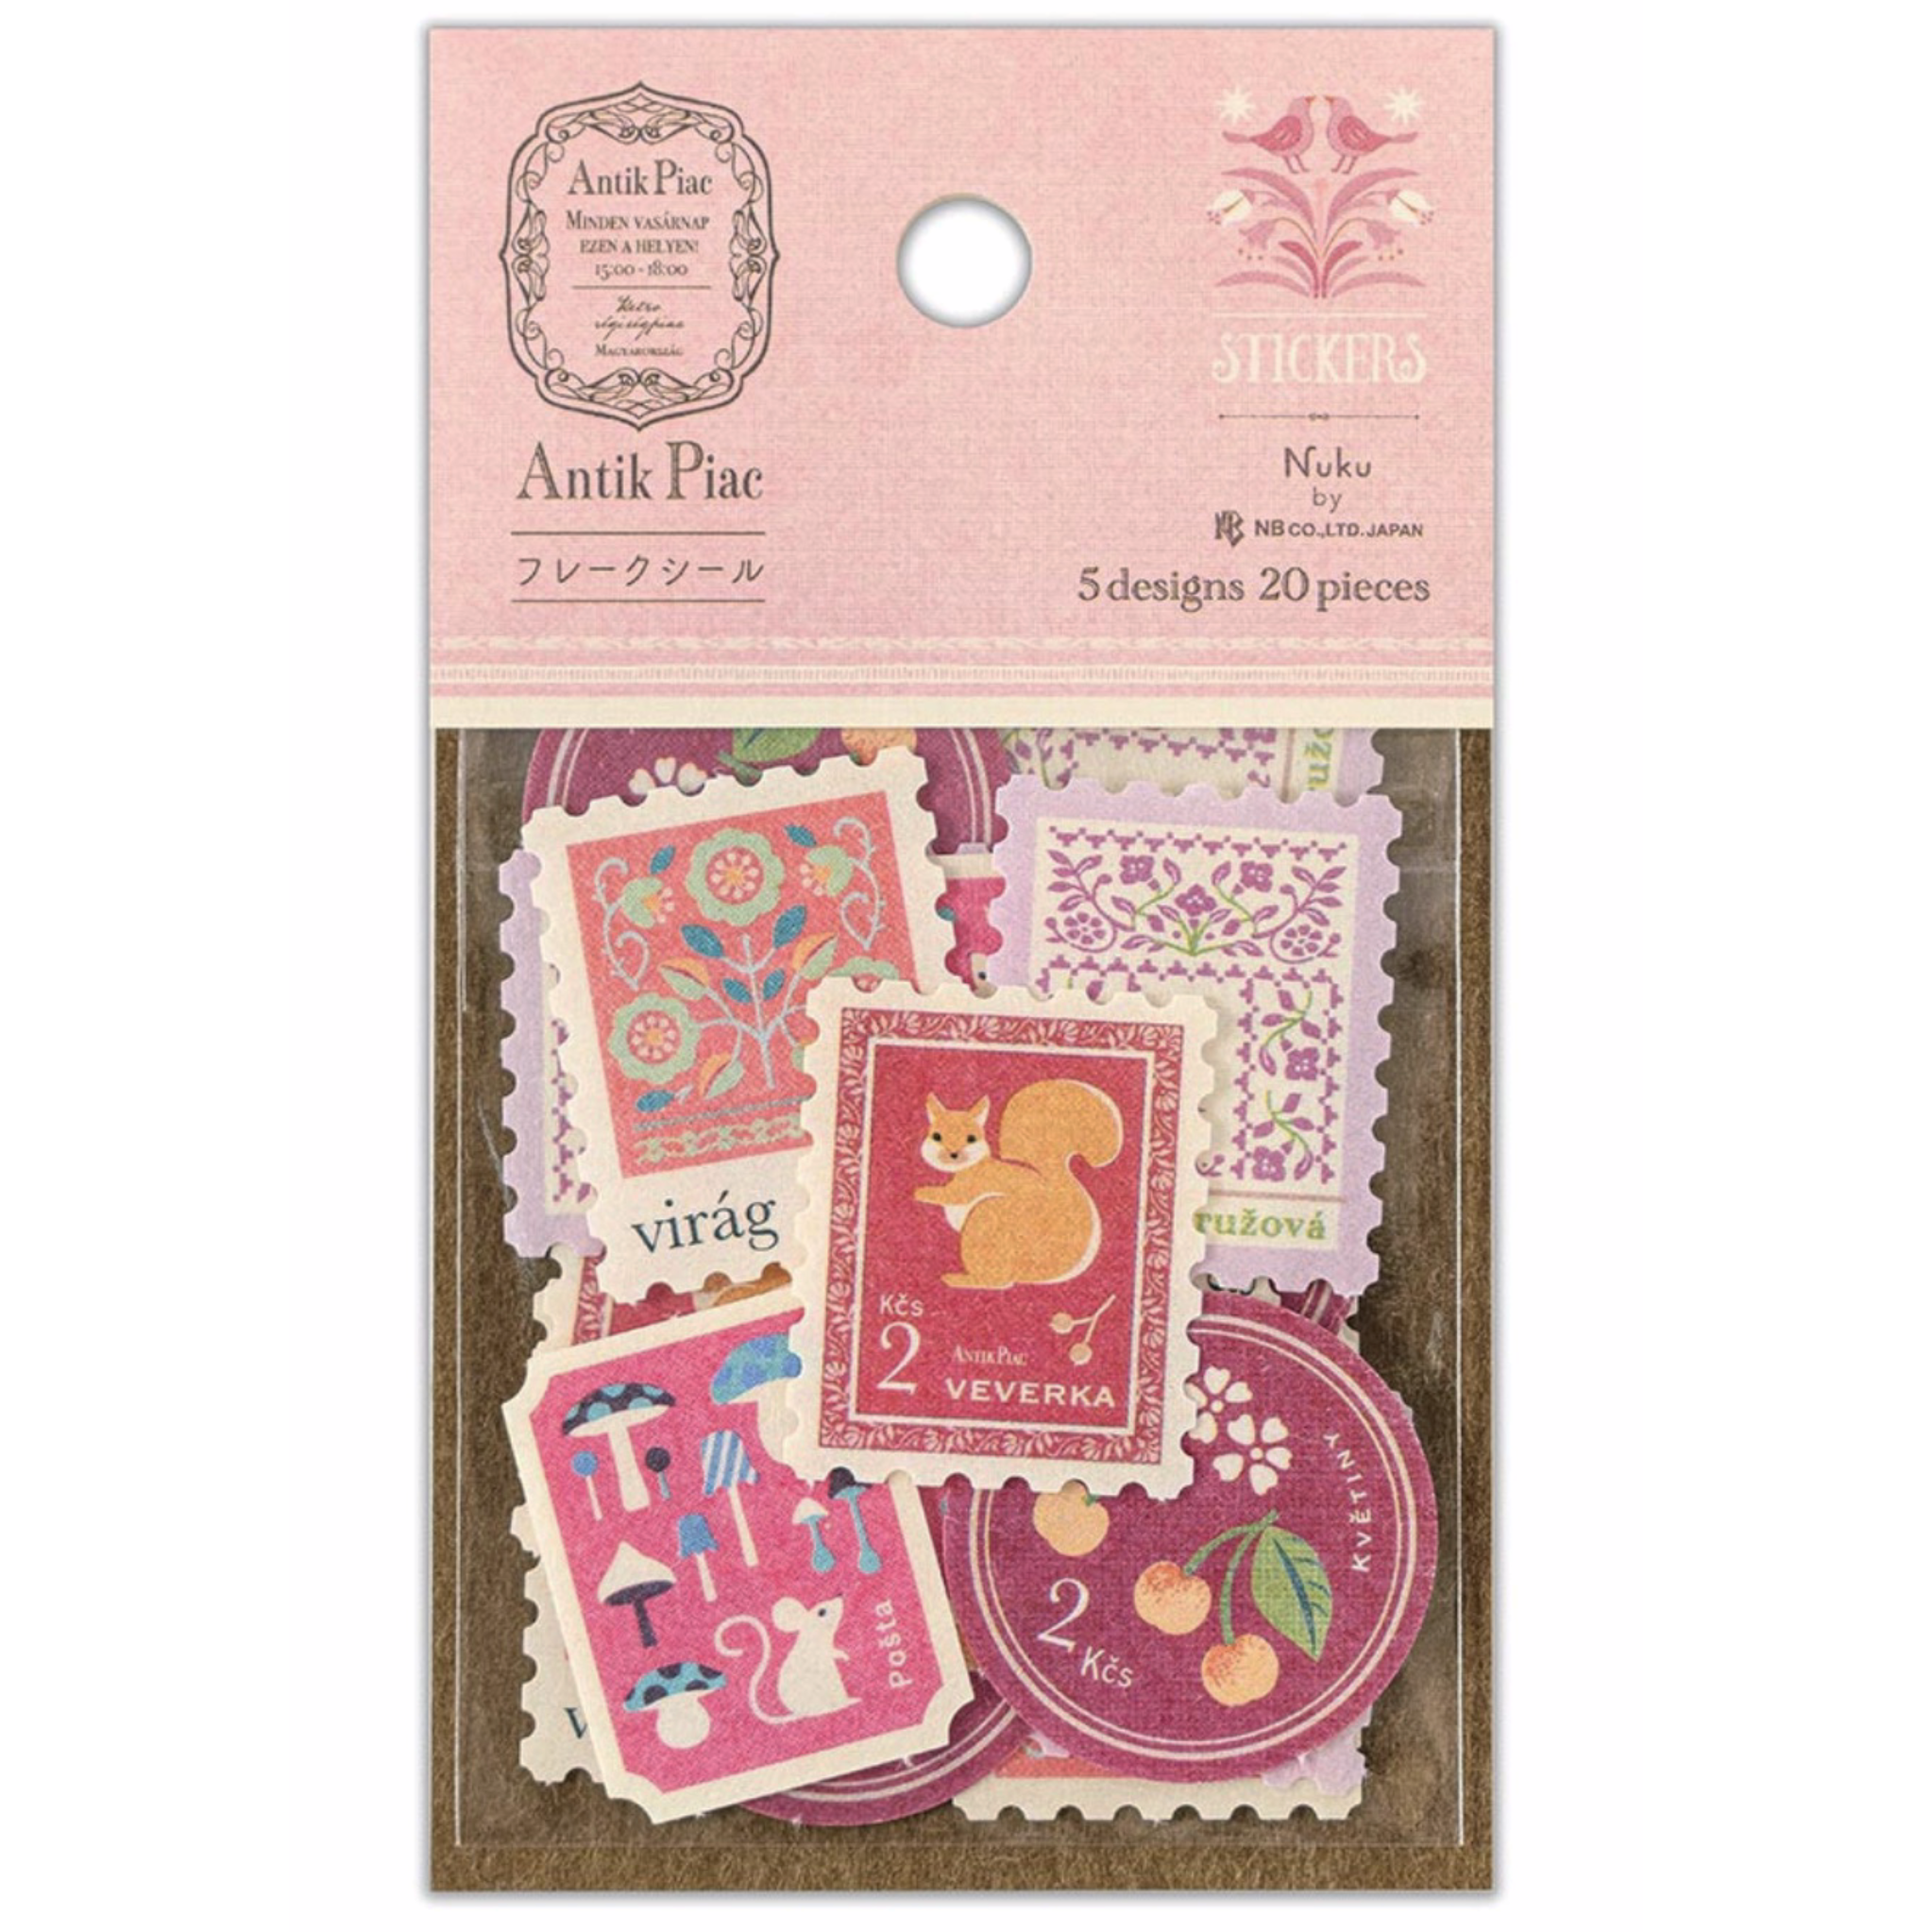 Pink and Rose Colored Stamp-like Sticker